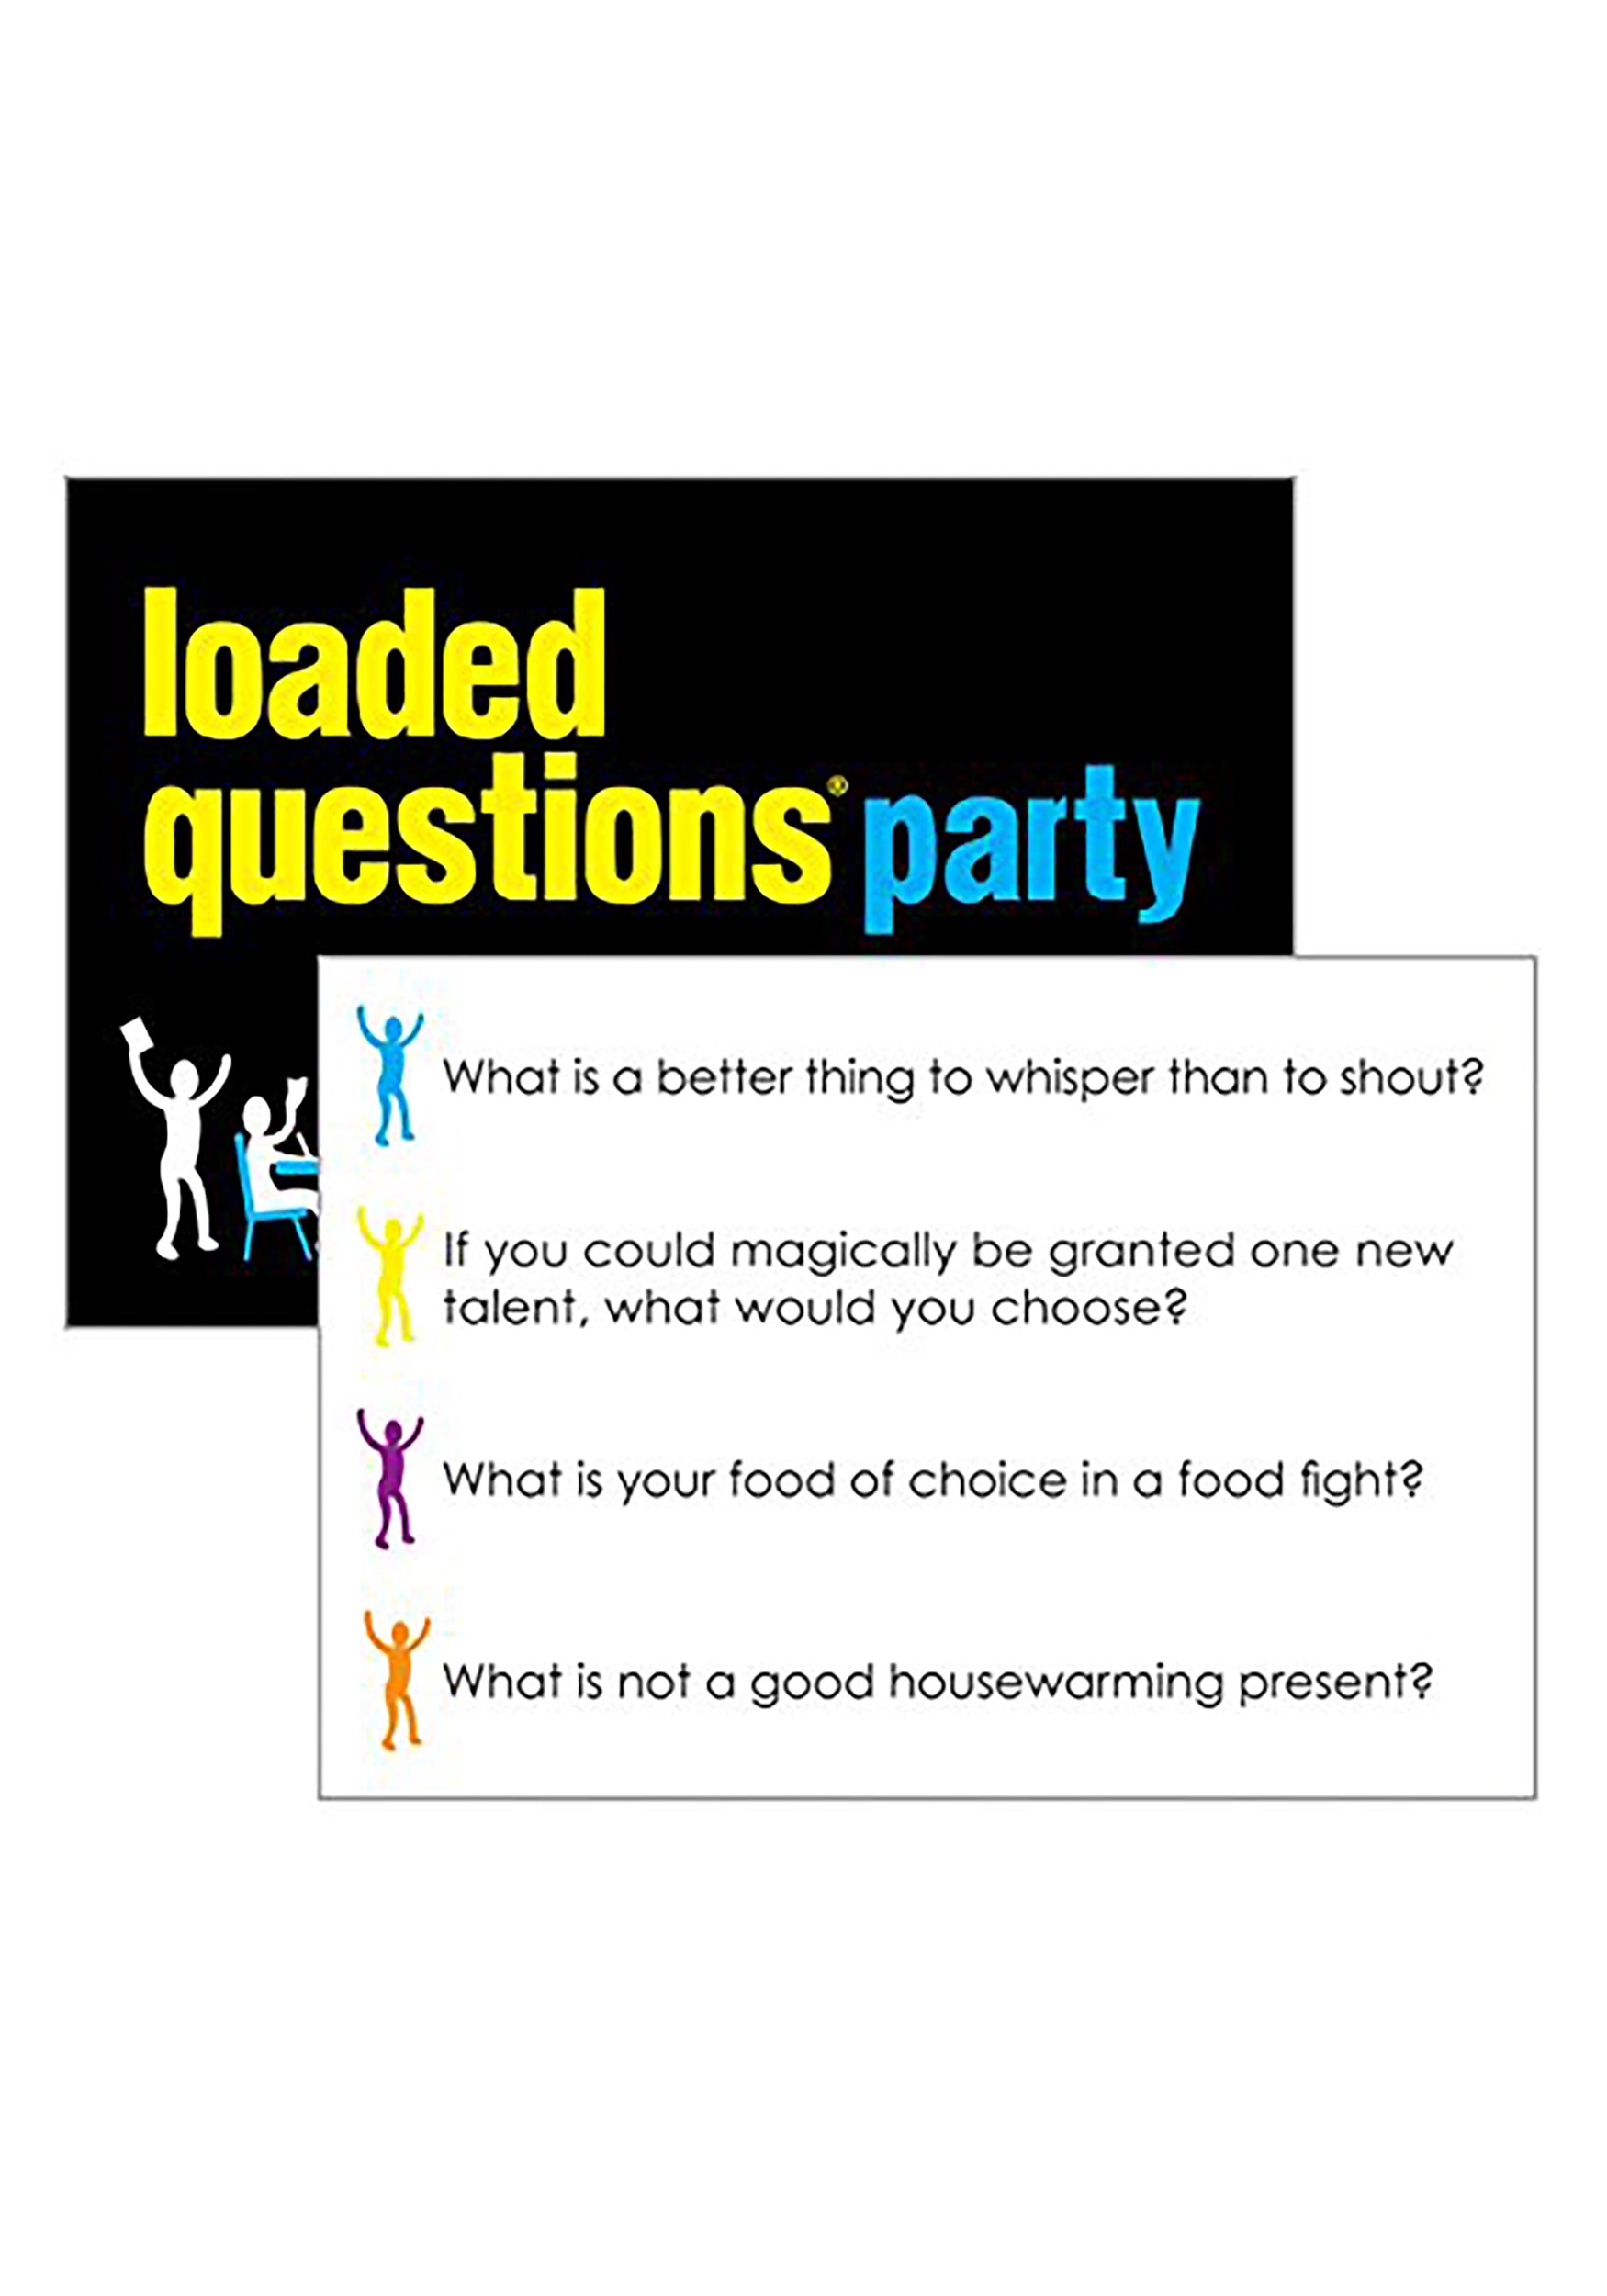 adult loaded questions game